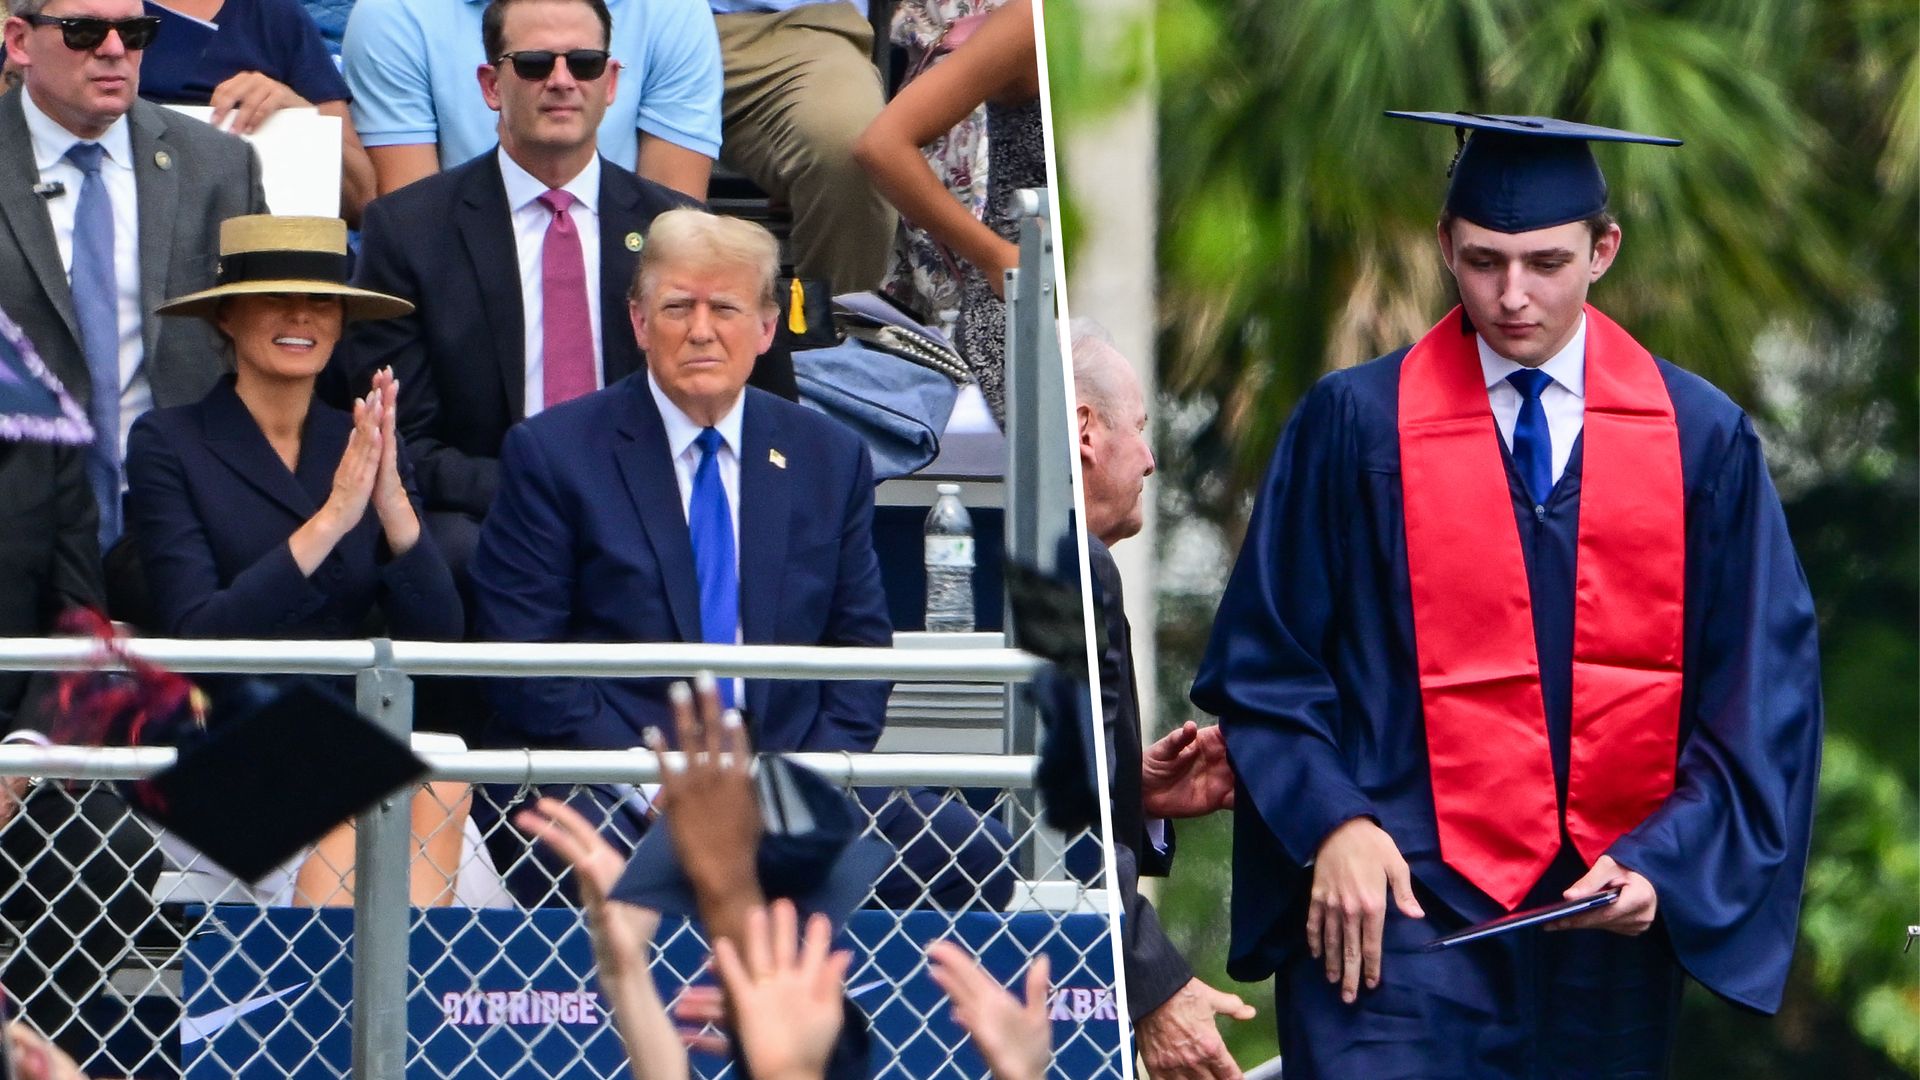 Melania Trump can't stop smiling as she cheers on Barron Trump, 18, during graduation